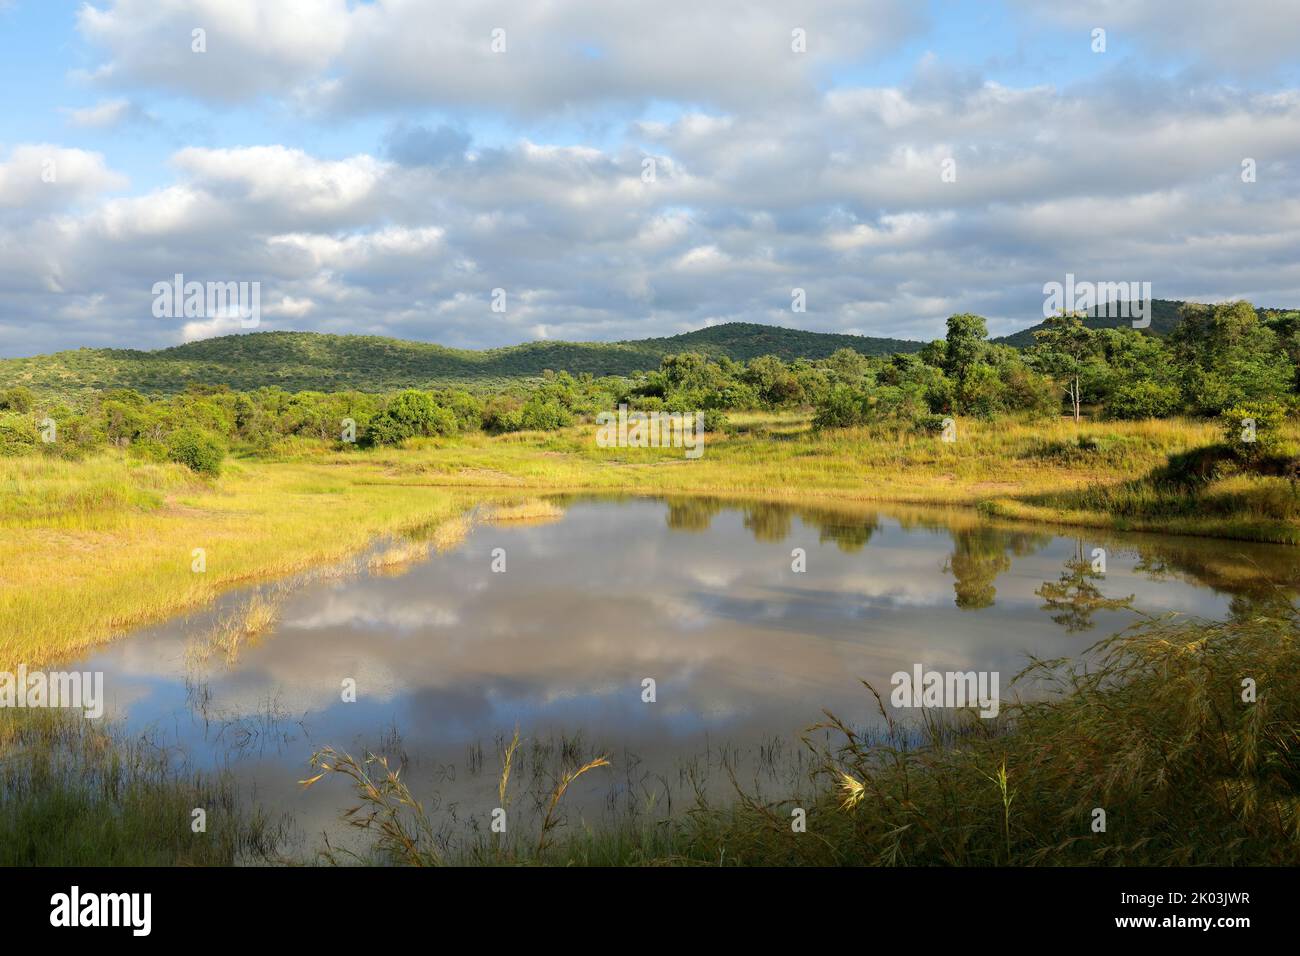 Scenic water pond in African savannah landscape, South Africa Stock Photo